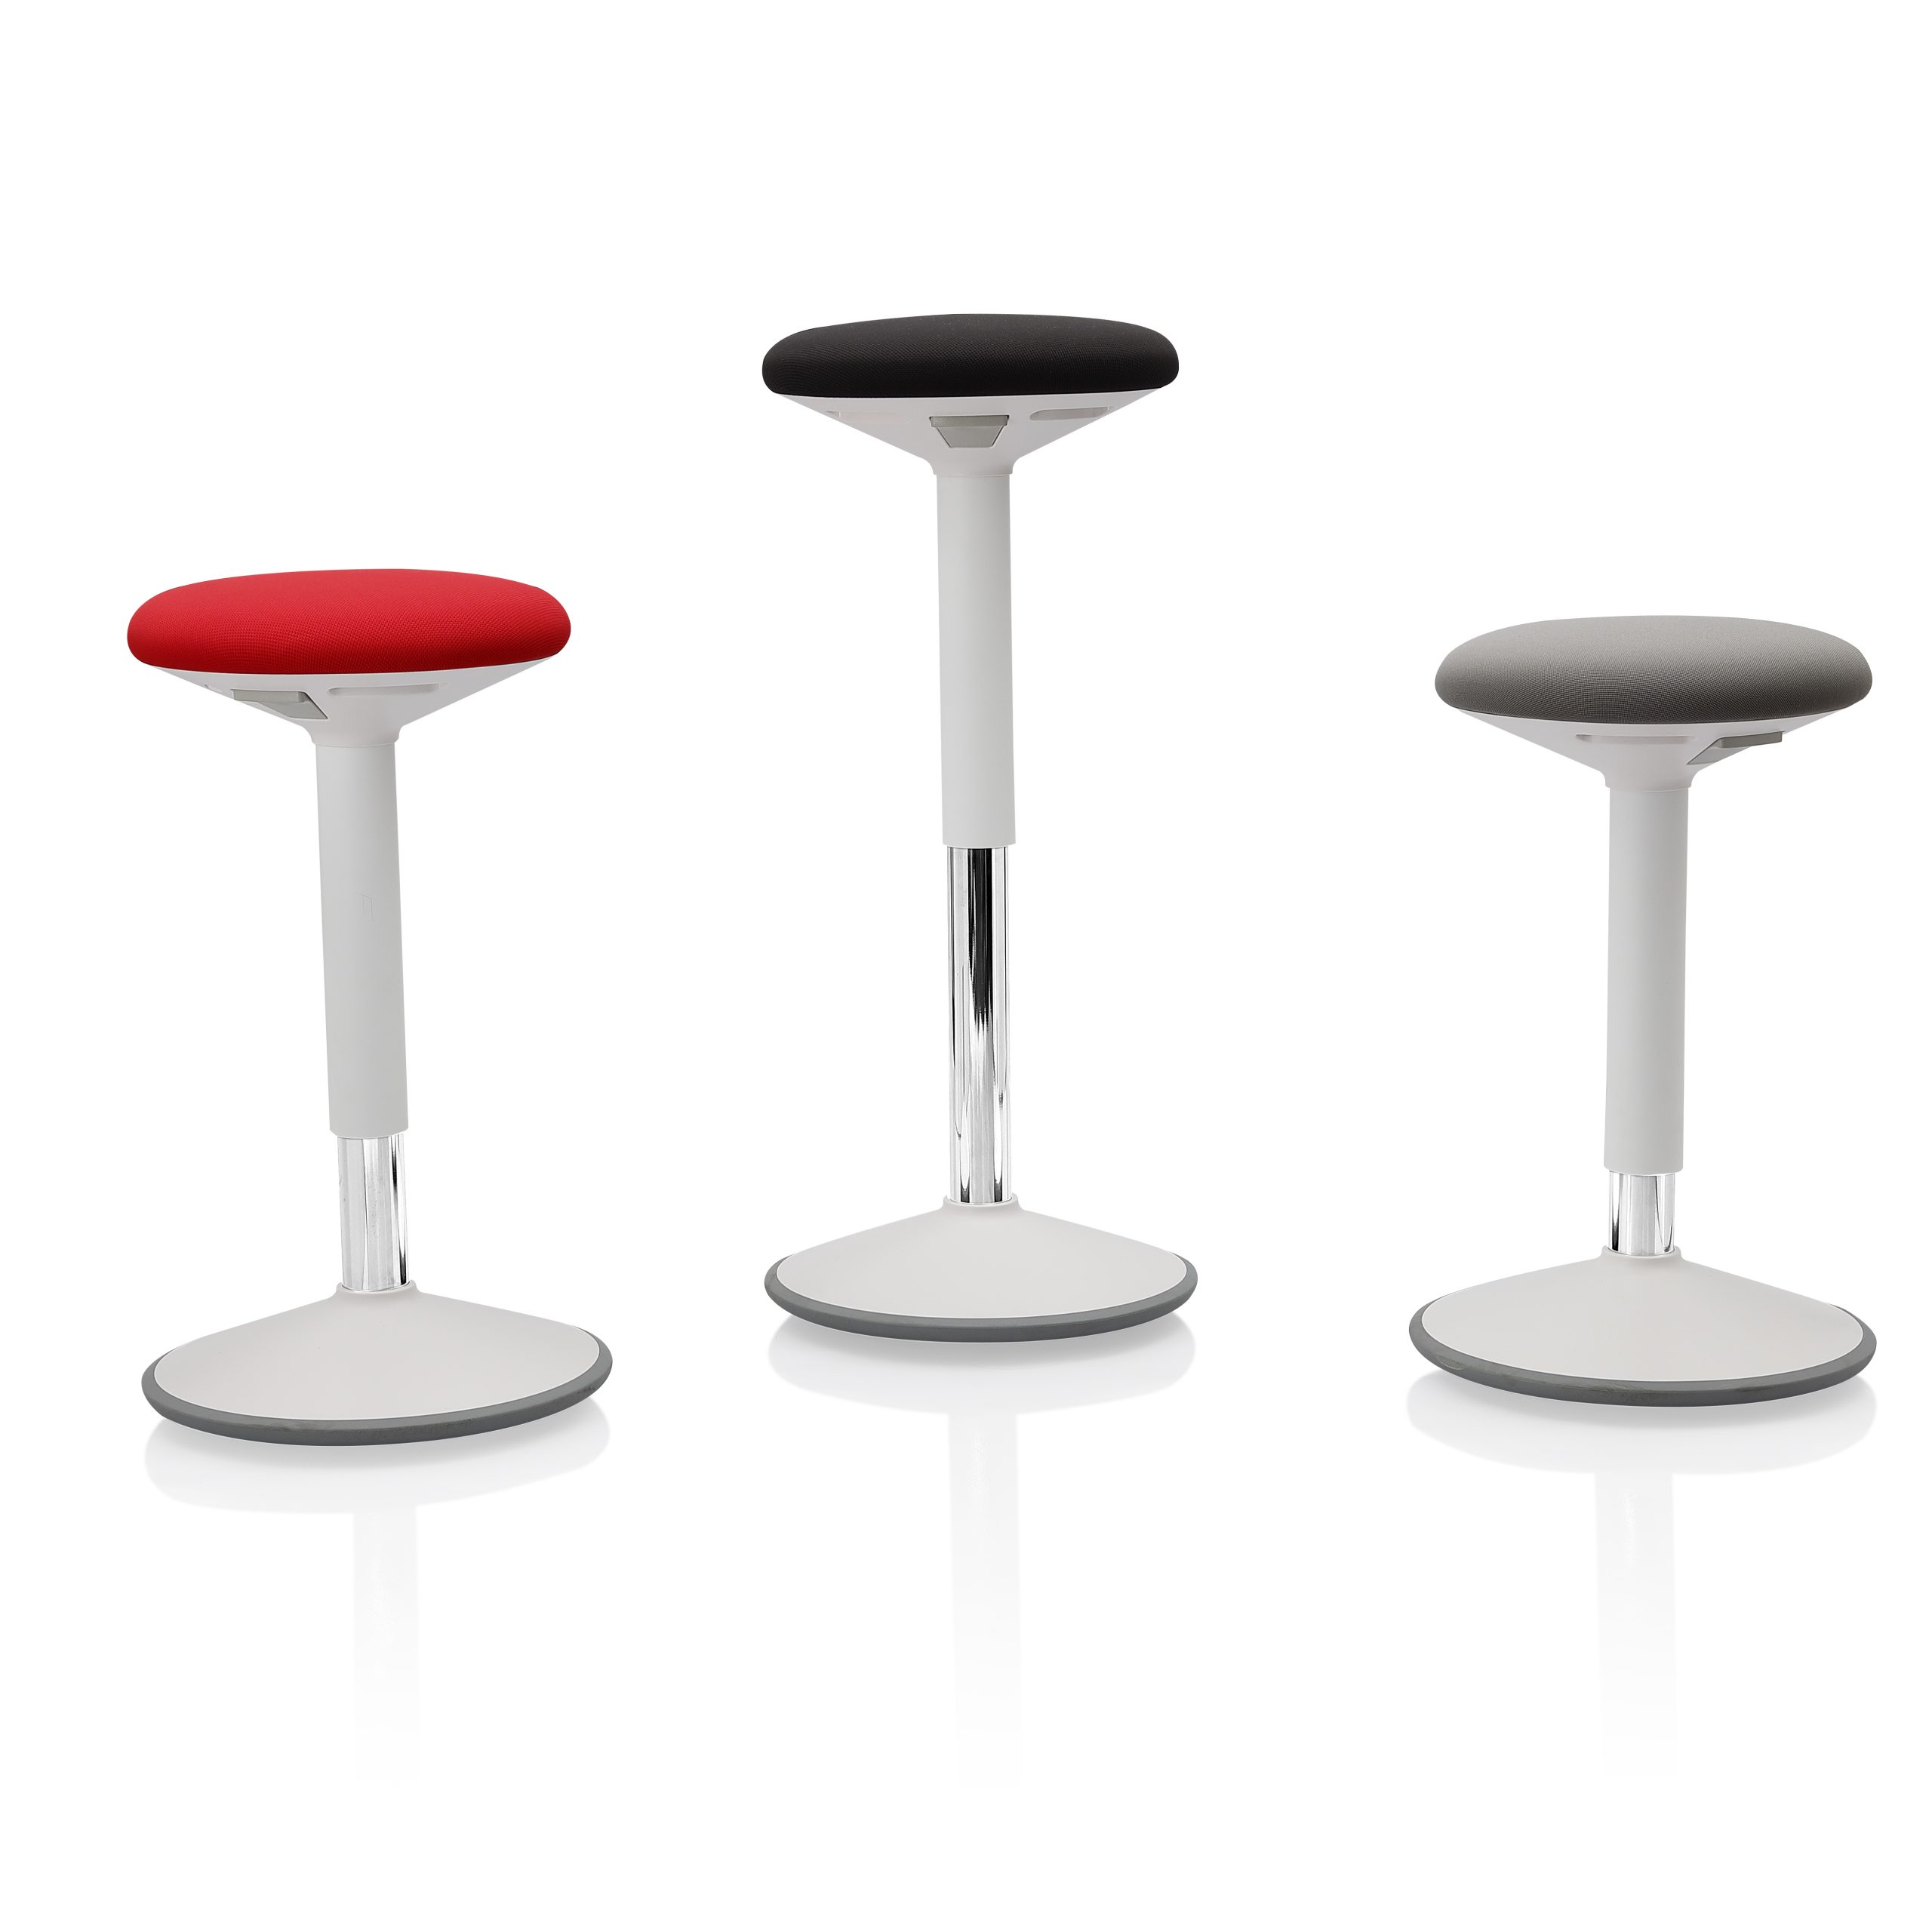 Wobble Stool By Navodesk, Ergonomic Stool, Active Chair